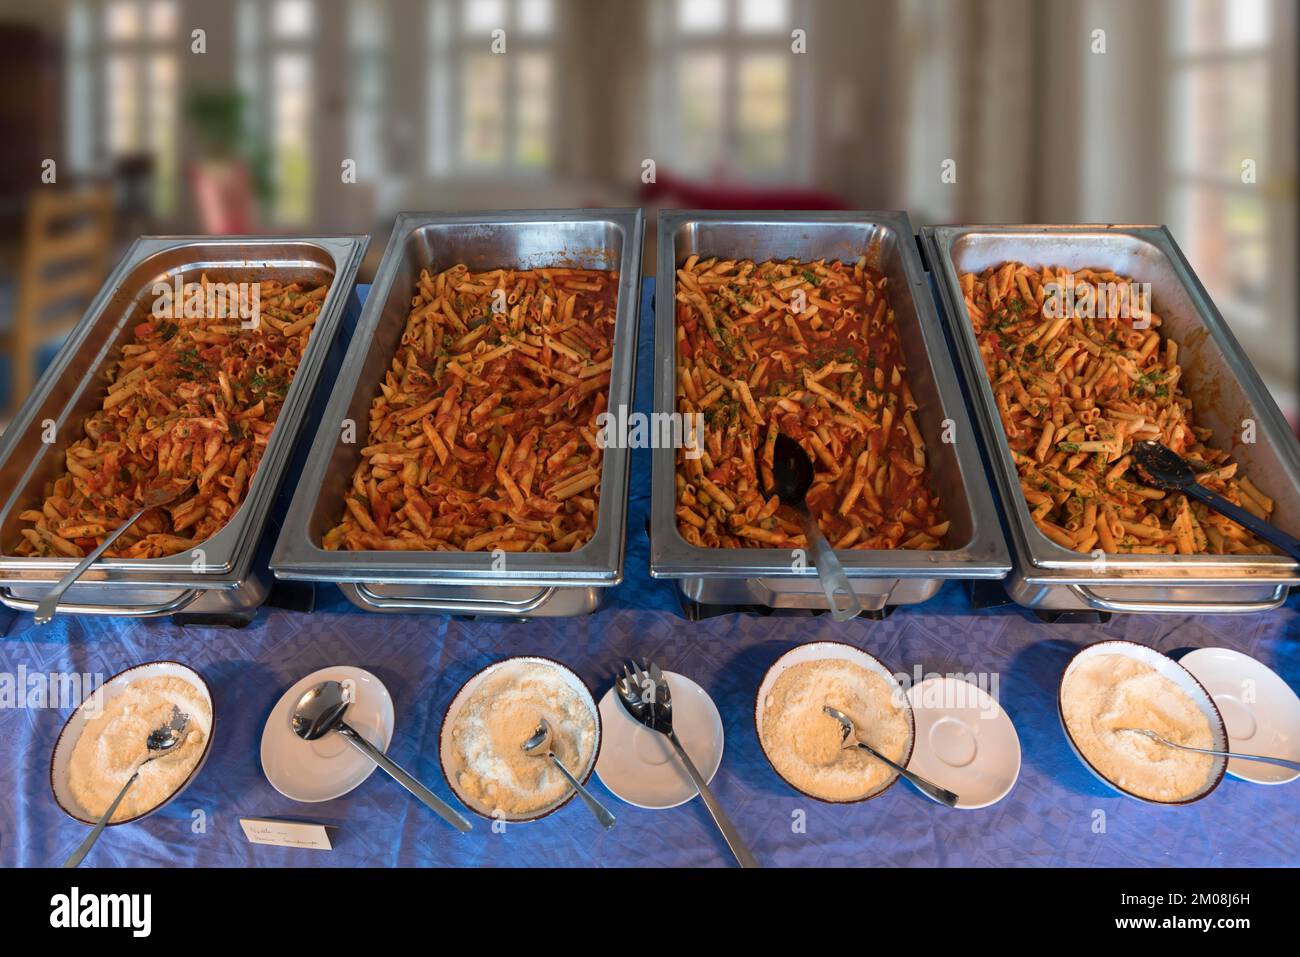 Catering, pasta with vegetables and tomato sauce, parmesan cheese in front, buffet at a party, Lower Saxony, Germany, Europe Stock Photo